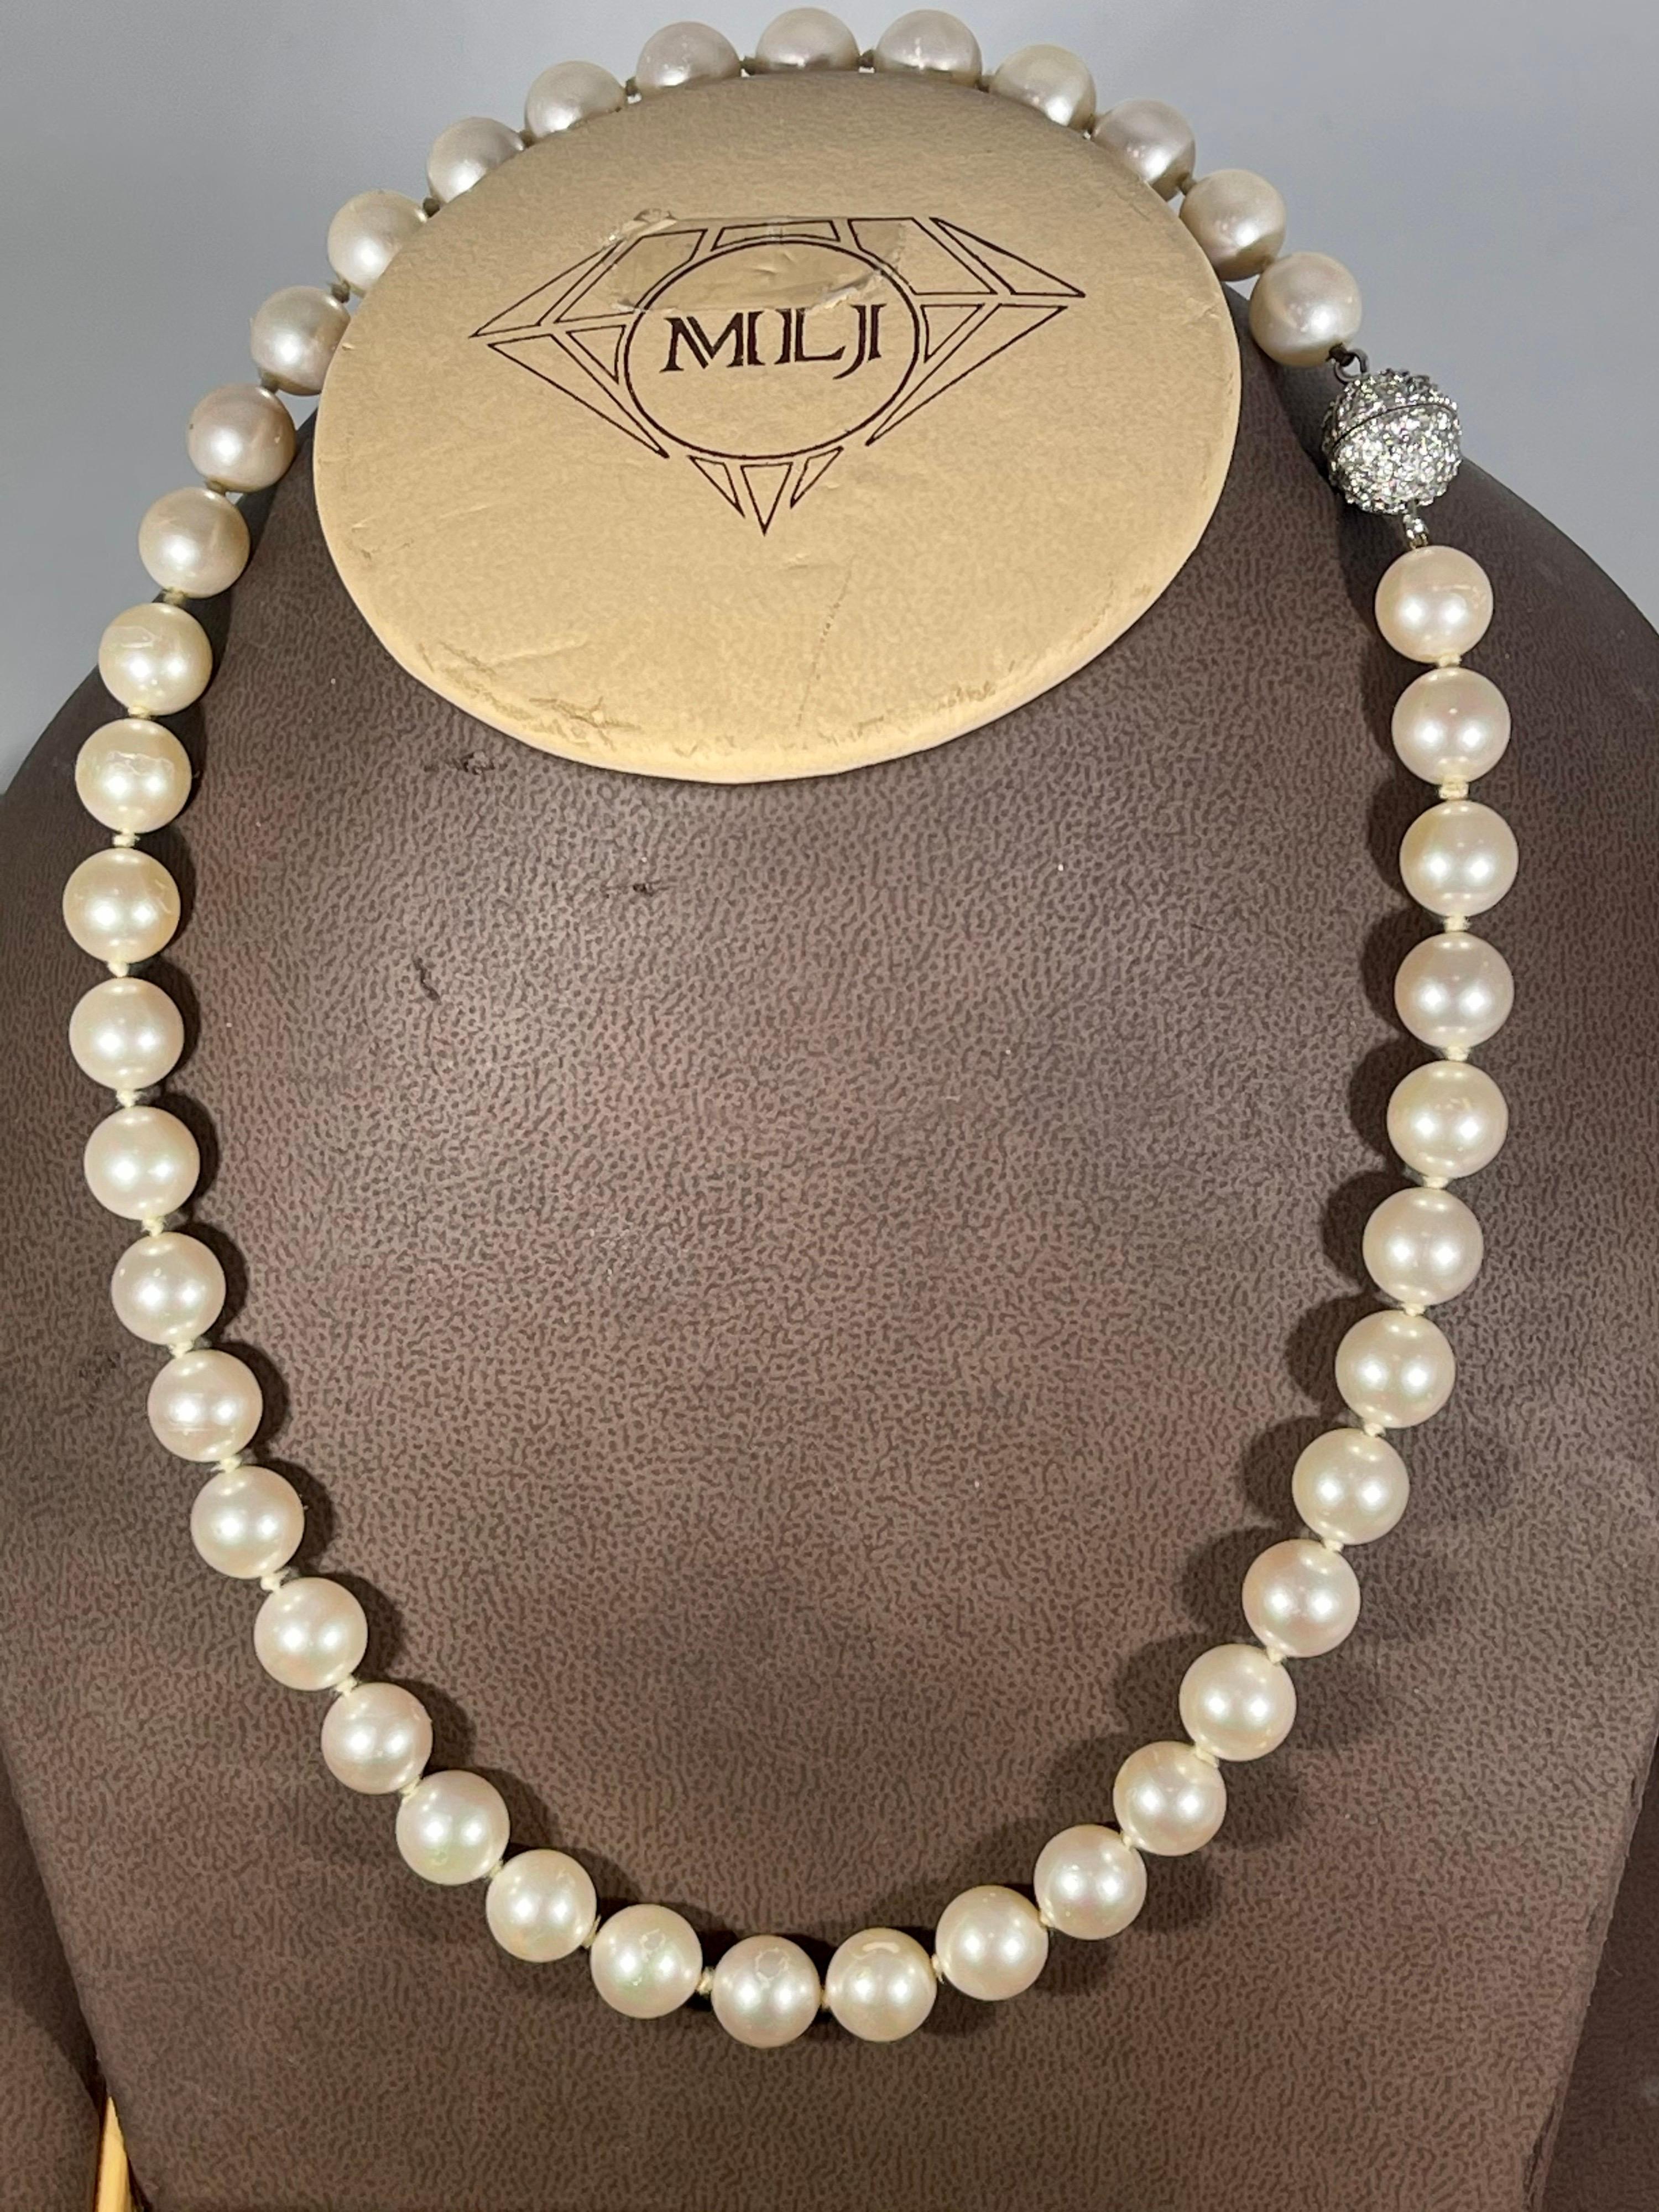 41 Round Akoya Pearls Strand Necklace Set in Metal Ball Clasp In Excellent Condition For Sale In New York, NY